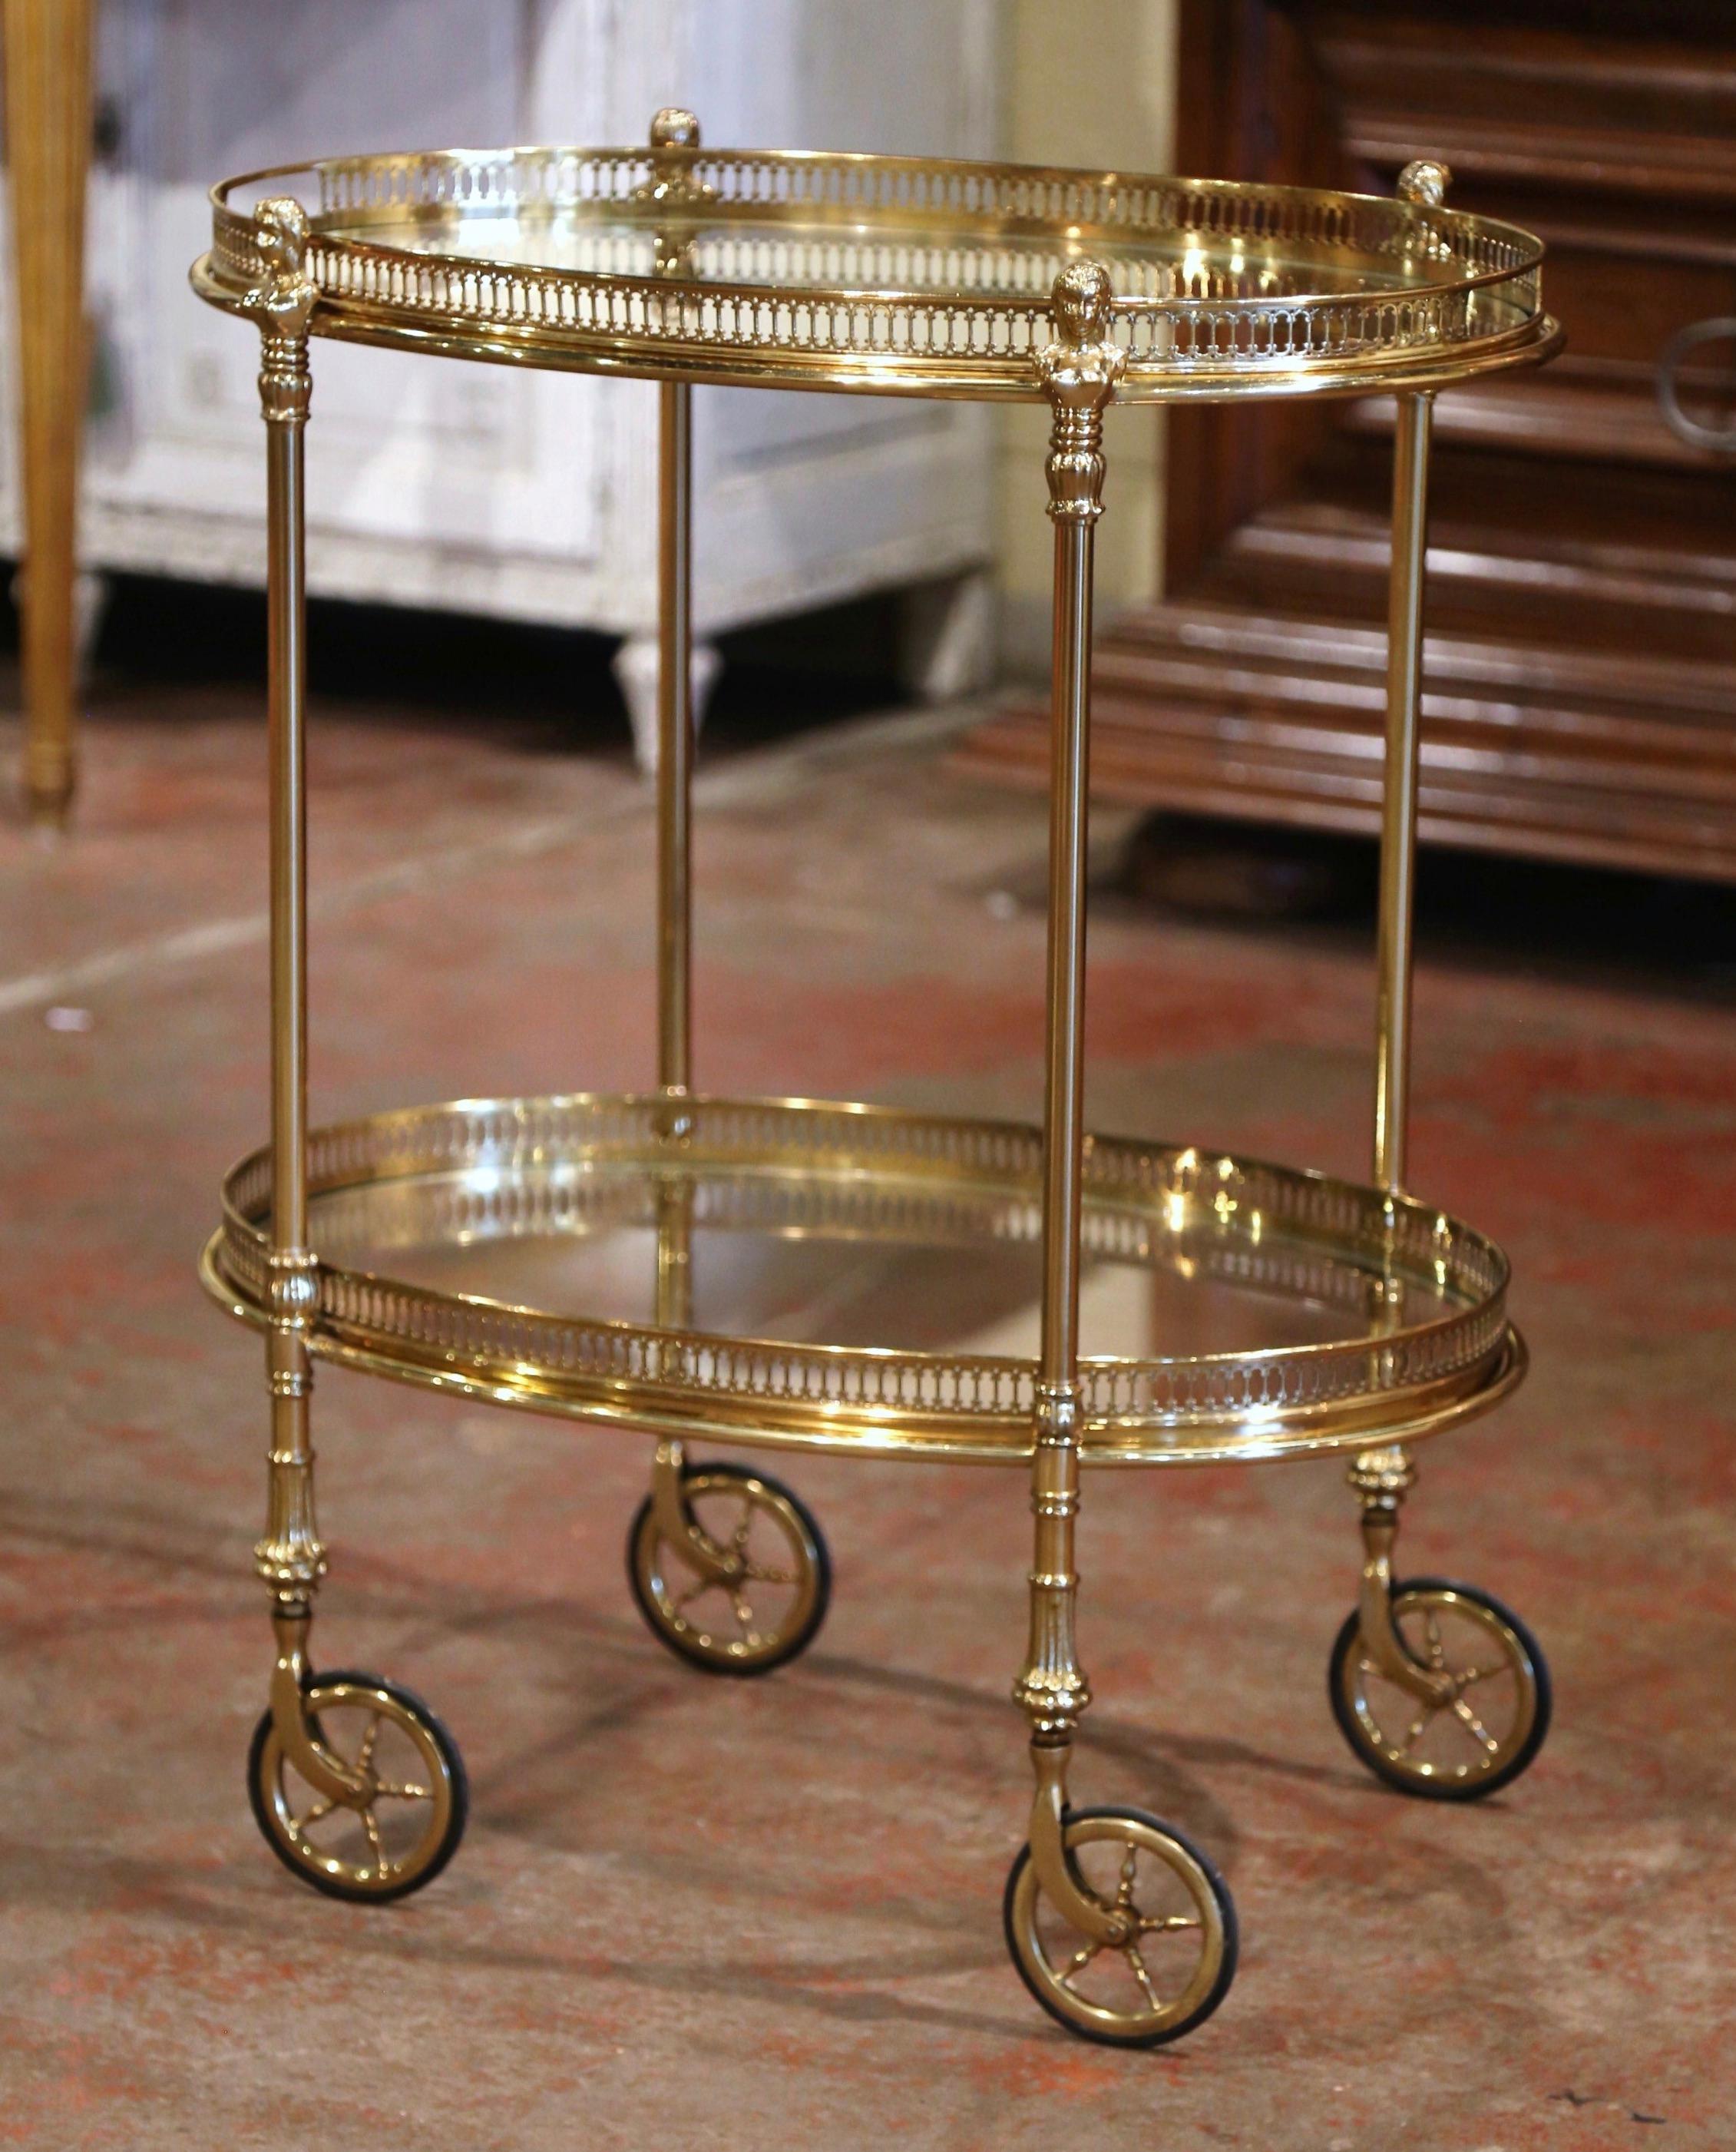 This beautiful, vintage two-tier rolling bar cart was created in France, circa 1950. Built in brass and oval in shape, the dessert table stands on small round wheels with rubber tires, over two plateaus topped with glass surfaces. The top deck